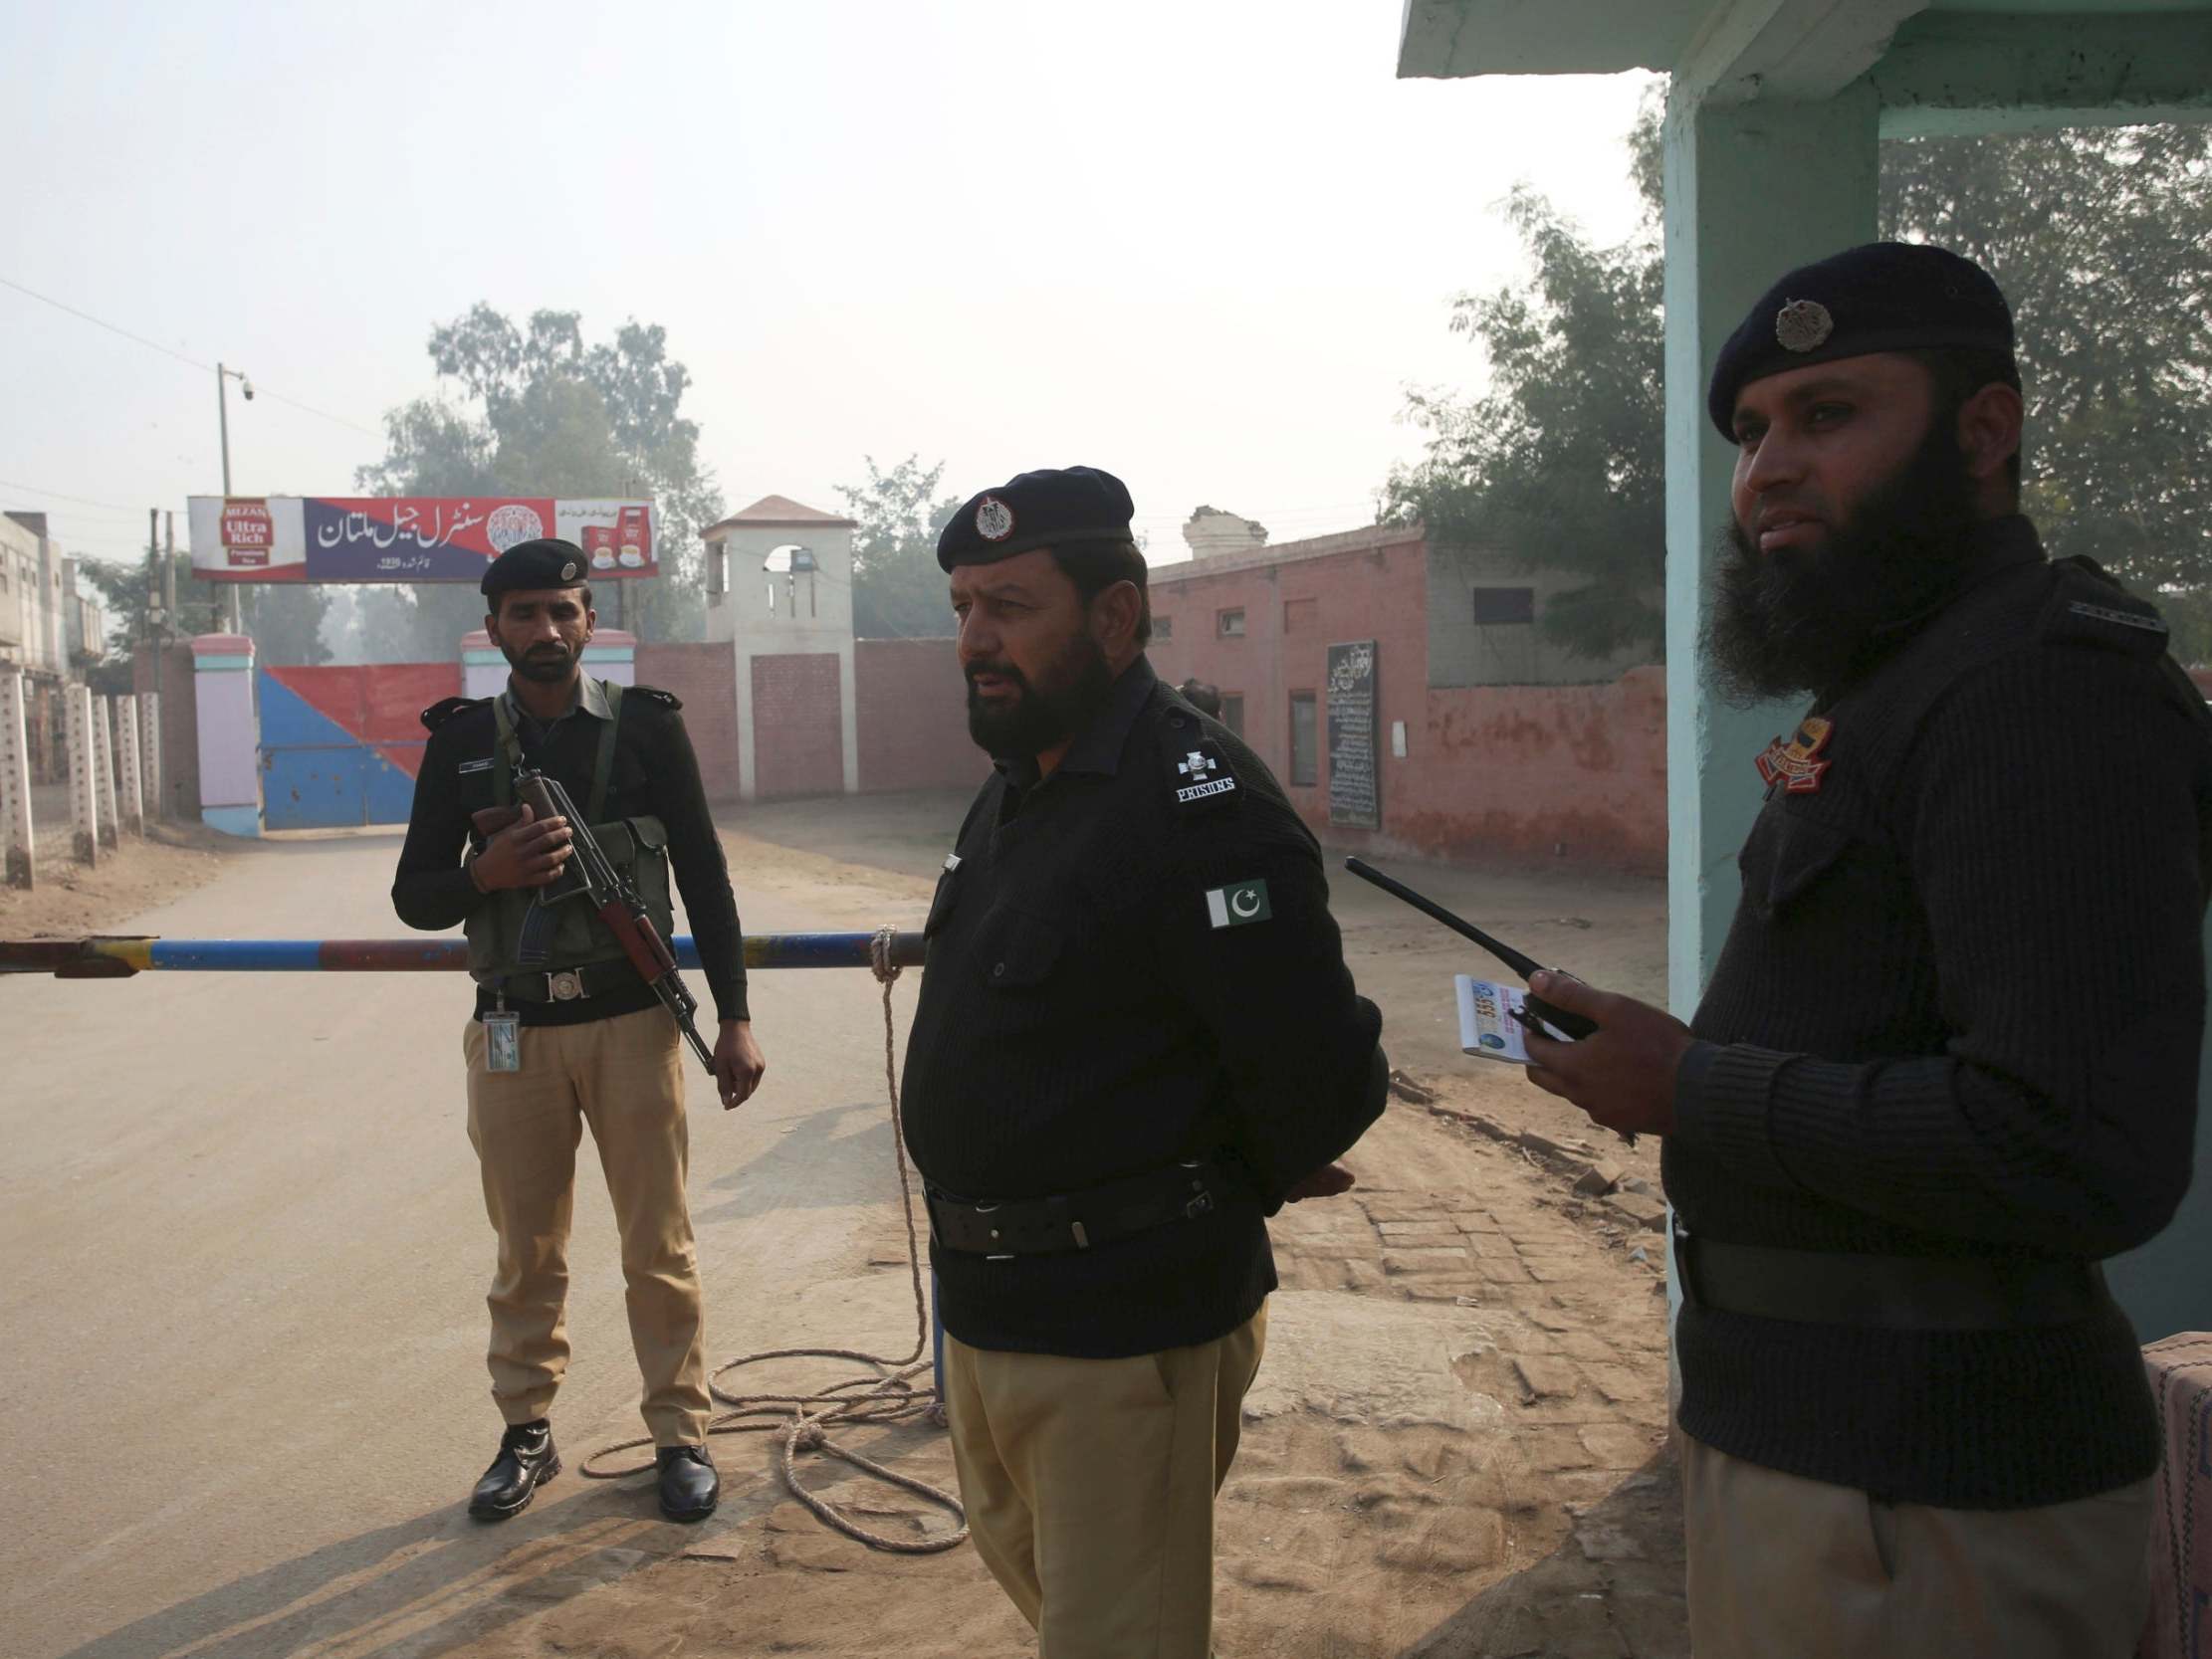 Pakistani police officers stand guard outside Multan jail where former university lecturer Junaid Hafeez was convicted of blasphemy and sentenced to the death penalty, 21 December, 2019.